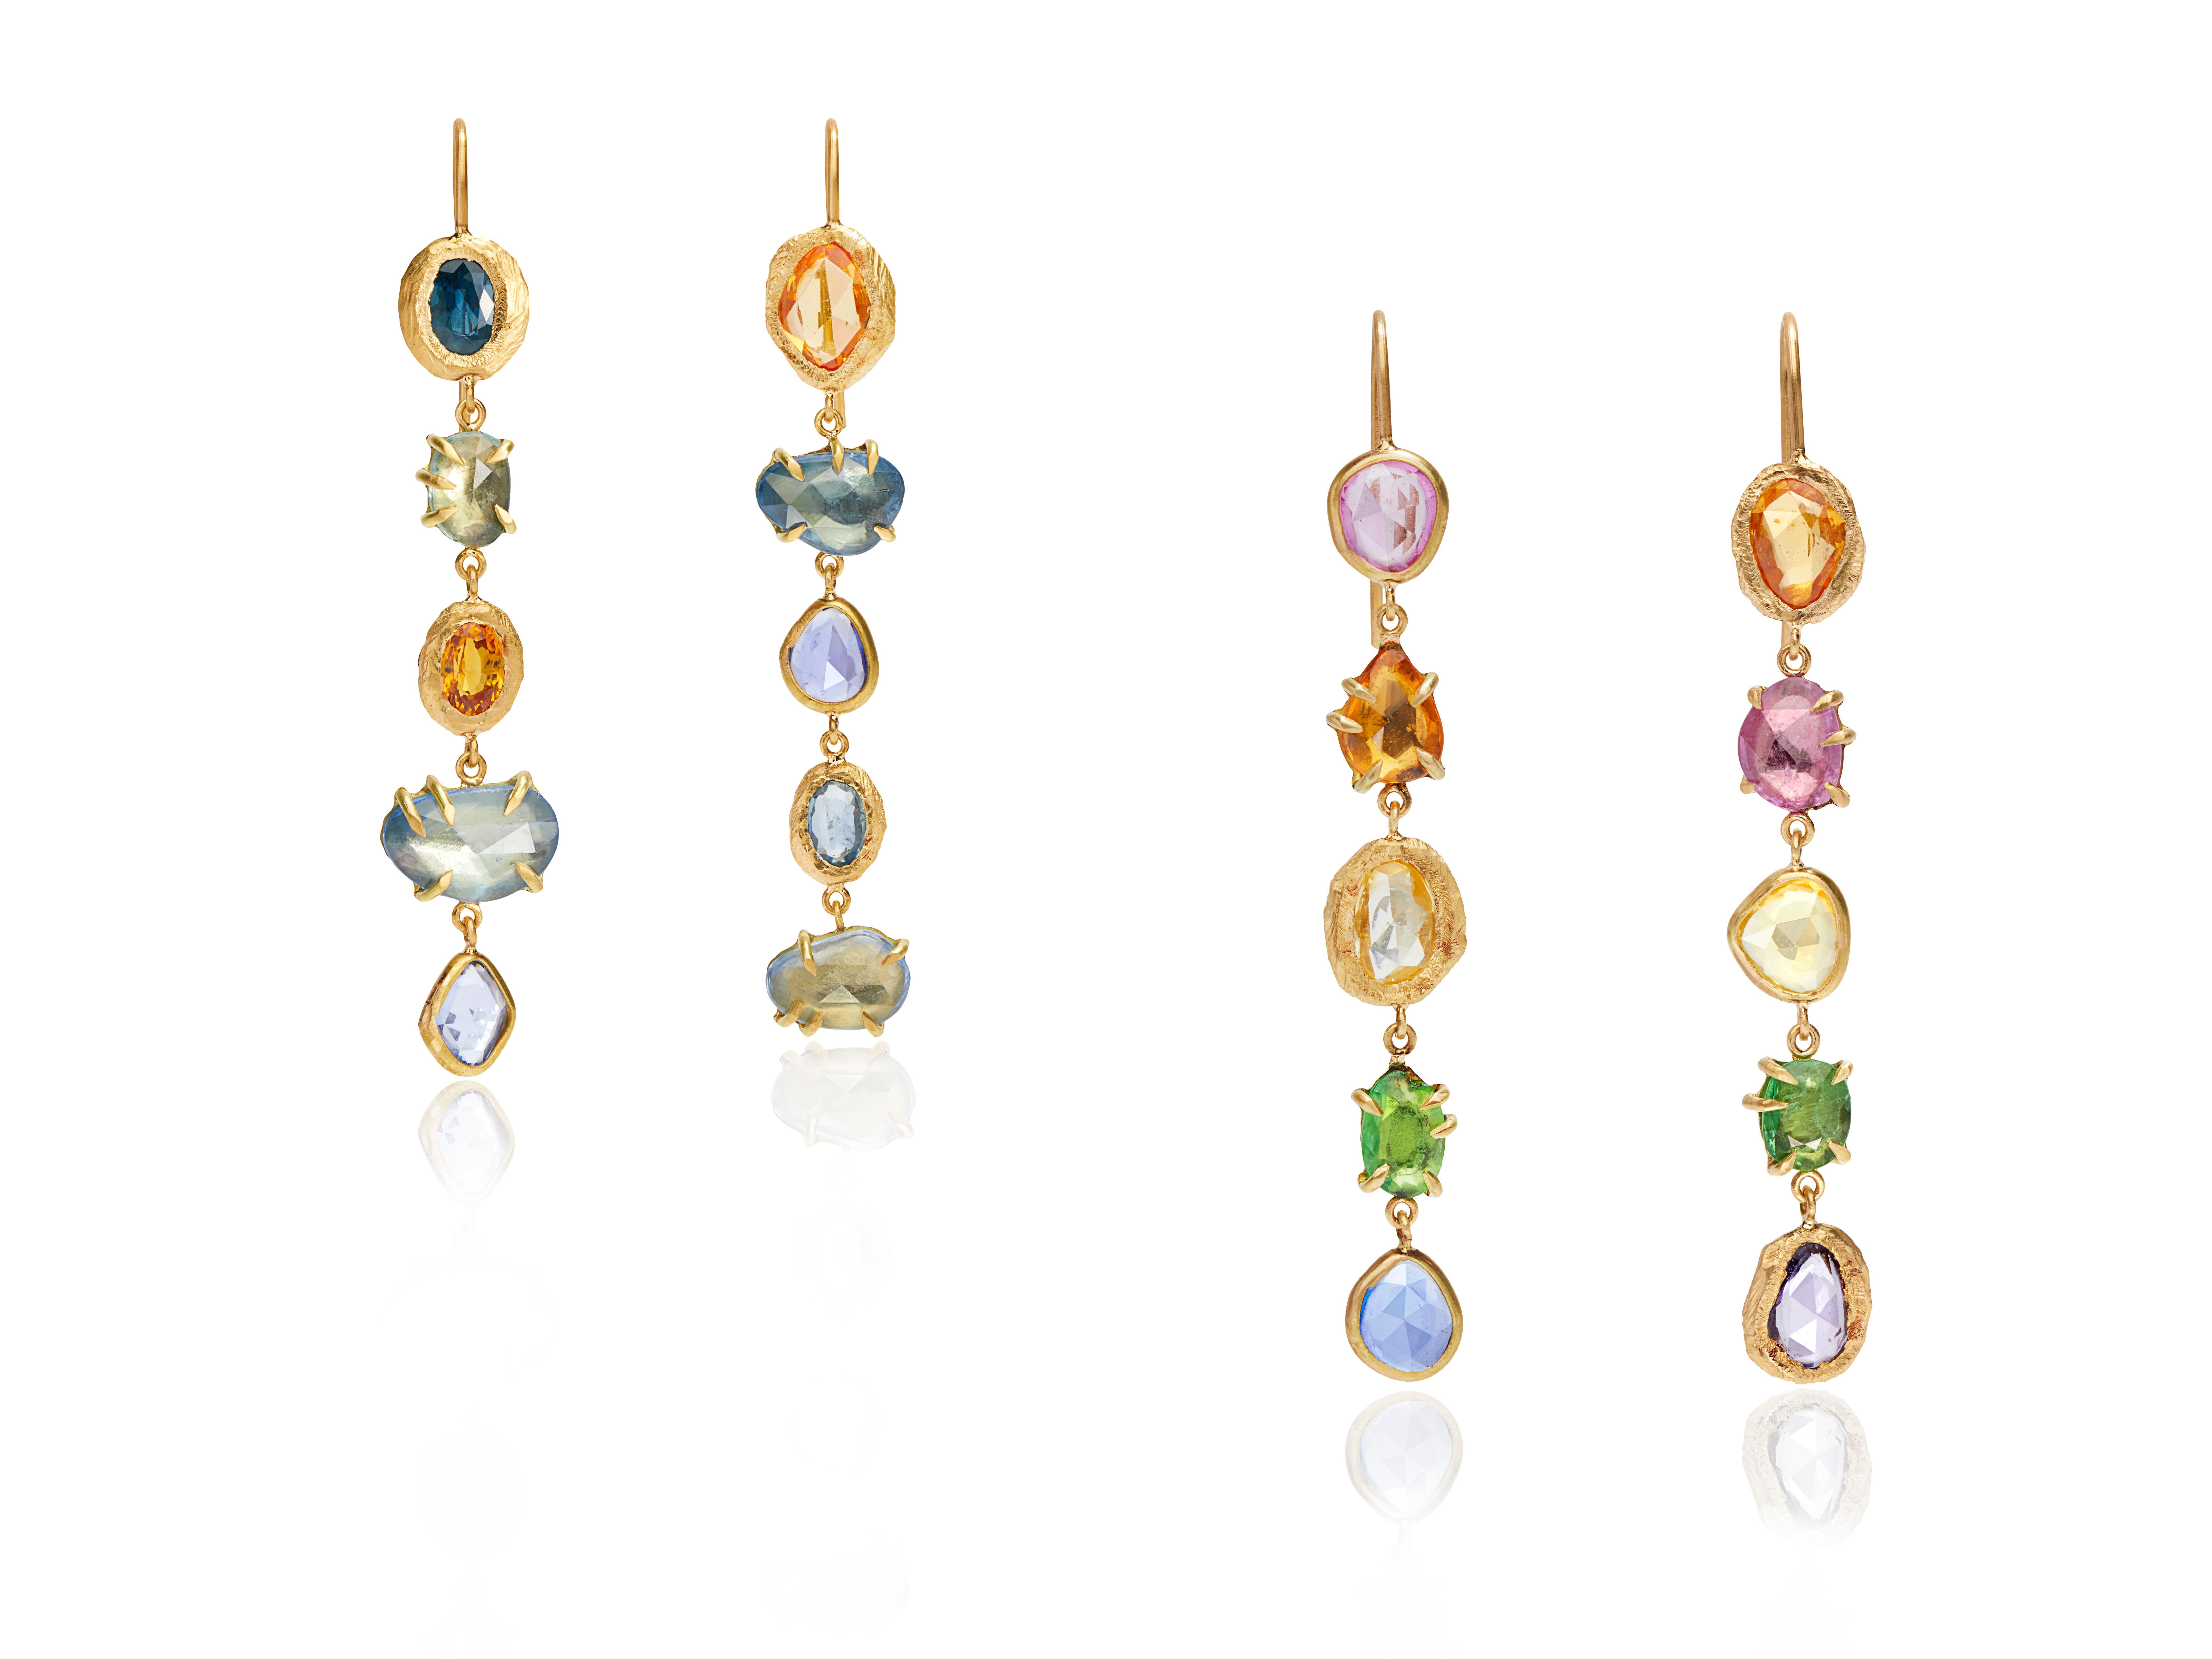 18kt one-of-a-kind gold drop earrings with ten multi color stones including blue sapphire, yellow sapphire, orange sapphire, pink sapphires and Tsavorite stones.

This collection is based on Bach's 